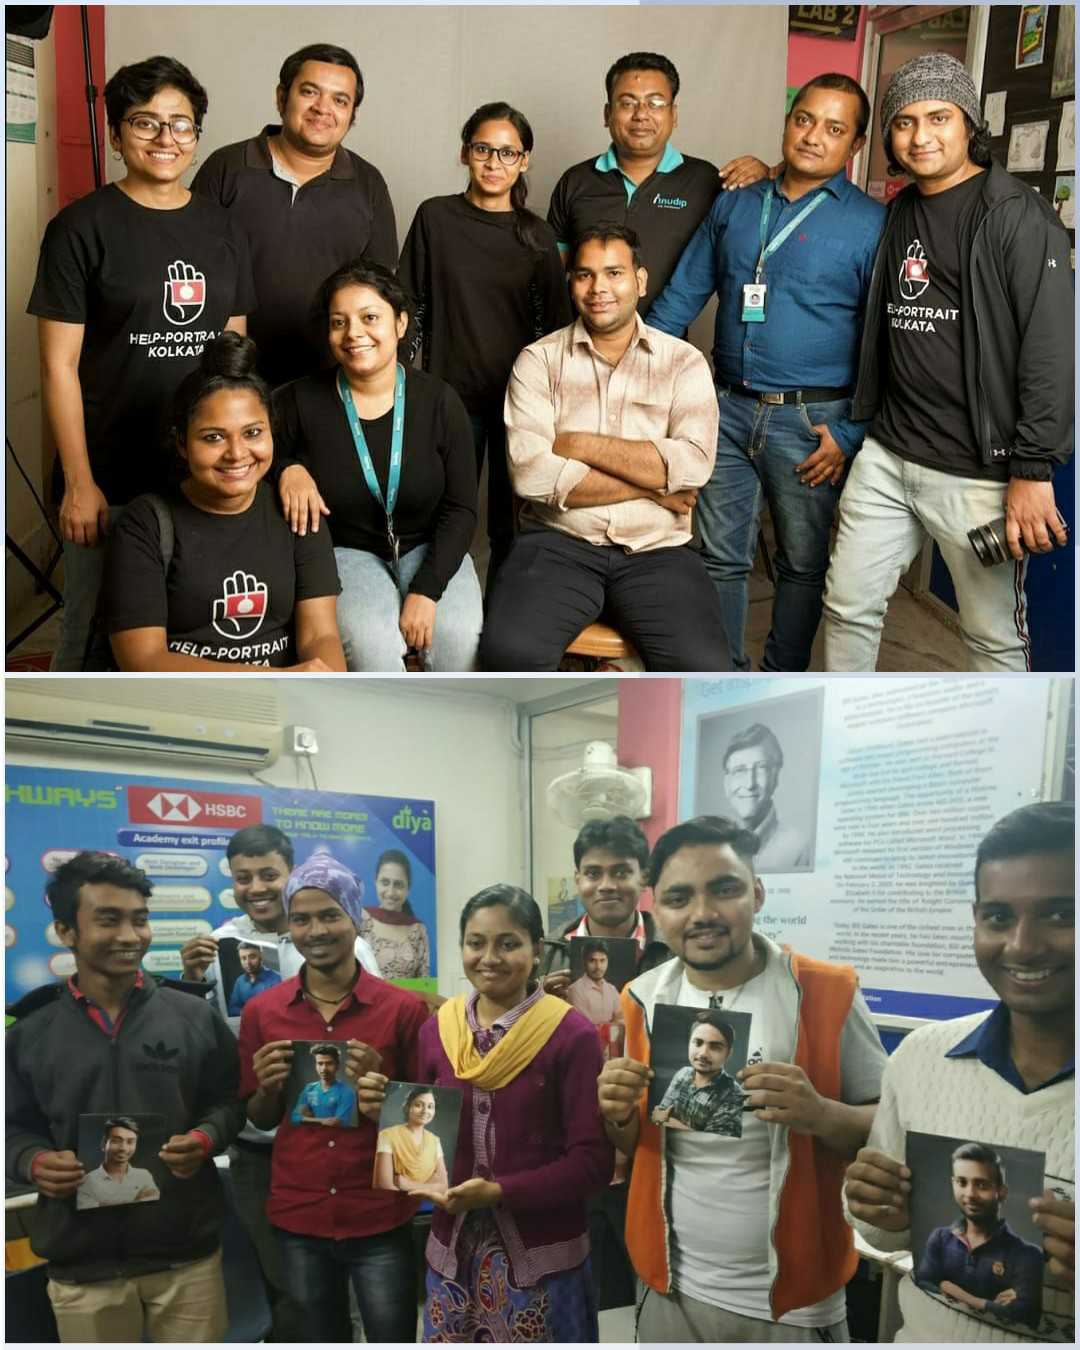 TOP - My Help-Portrait, Kolkata 2019 team alsong with the support team from Anudip Foundation, Baruipur centre pose for a group photo after wrapping up the shoot! BOTTOM - A few of the students with their portrait printouts from the HPK session.